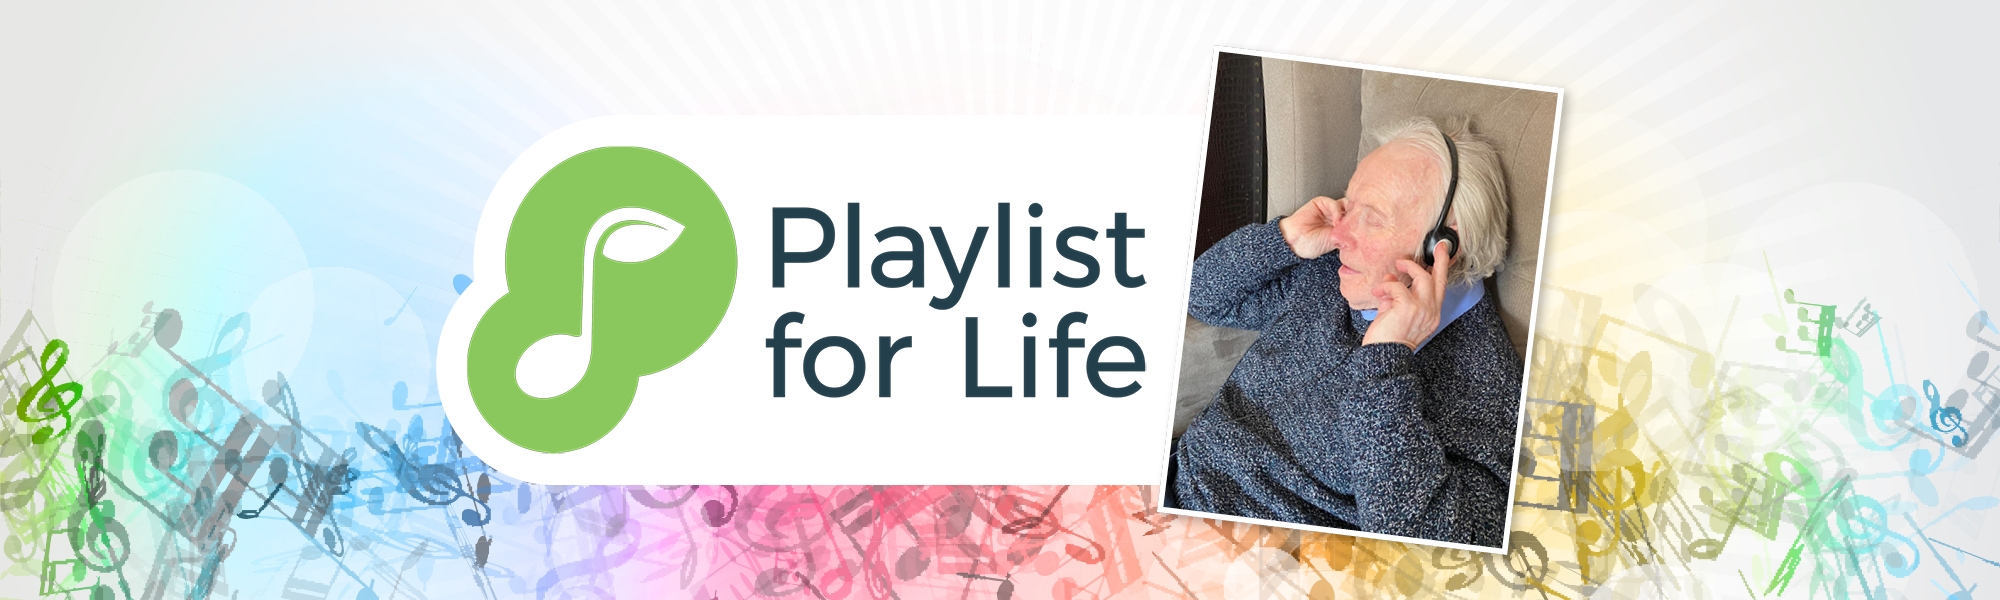 Playlist for Life Music Dementia CARE Highcliffe care home